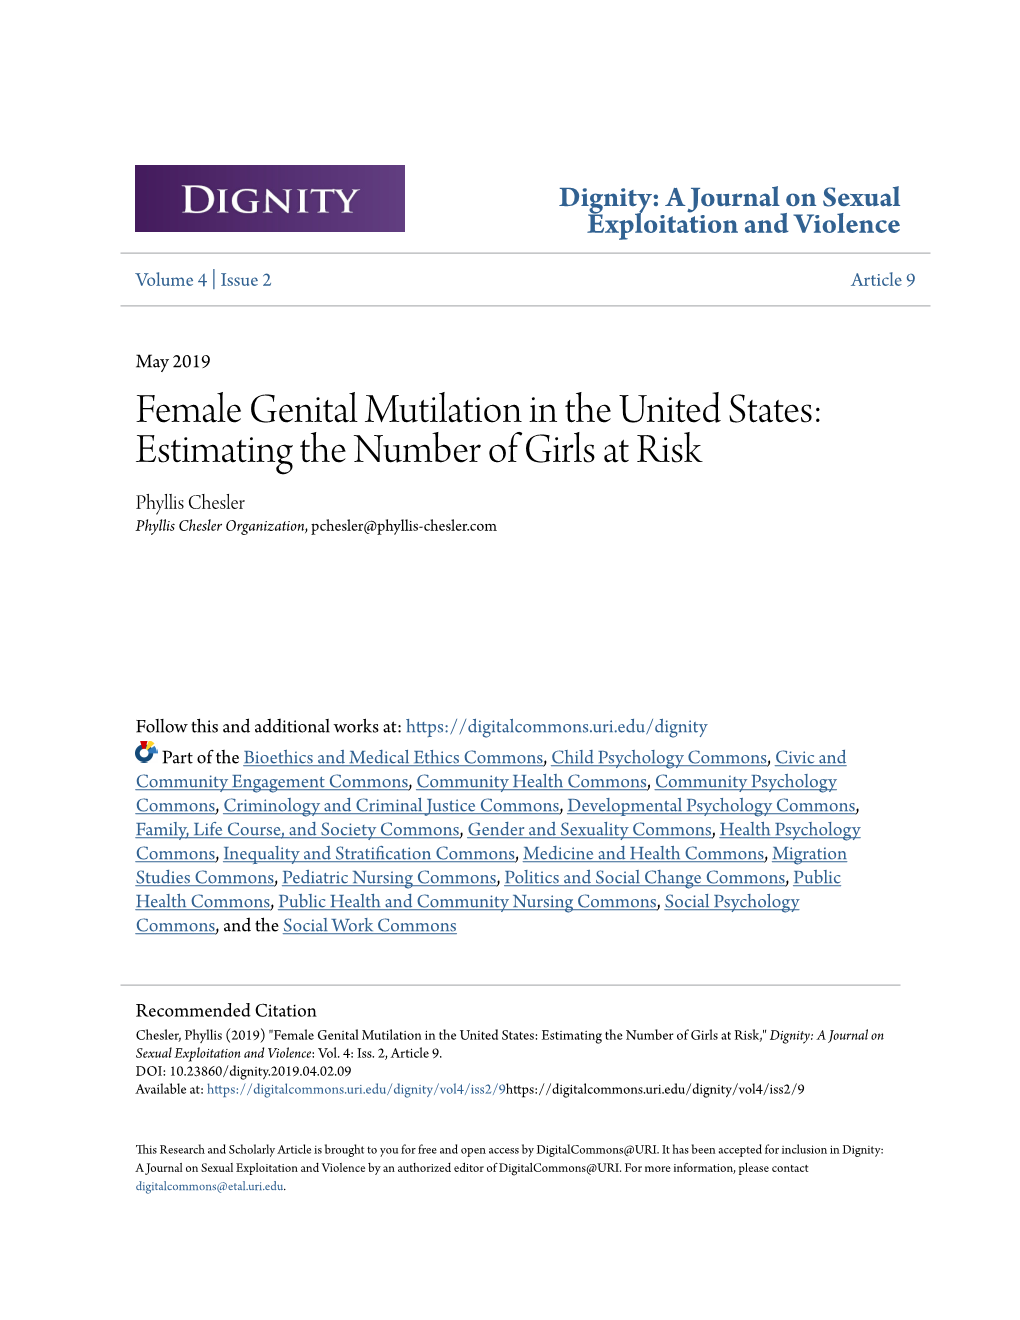 Female Genital Mutilation in the United States: Estimating the Number of Girls at Risk Phyllis Chesler Phyllis Chesler Organization, Pchesler@Phyllis-Chesler.Com